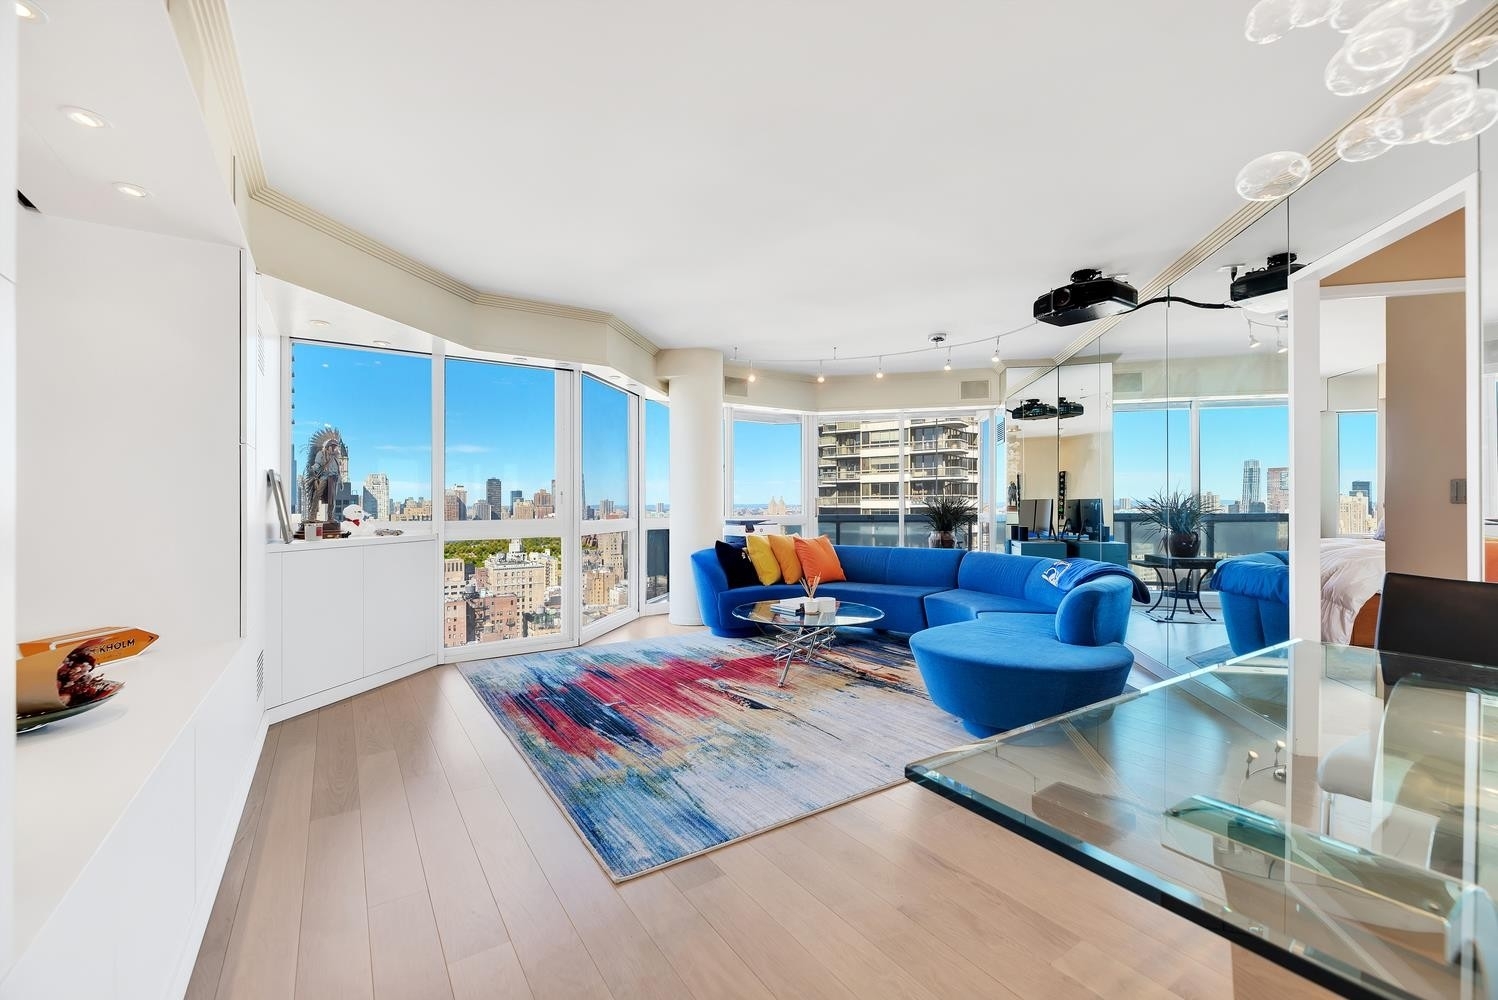 Condominium for Sale at The Savoy, 200 E 61ST ST, 35D Lenox Hill, New York, New York 10065